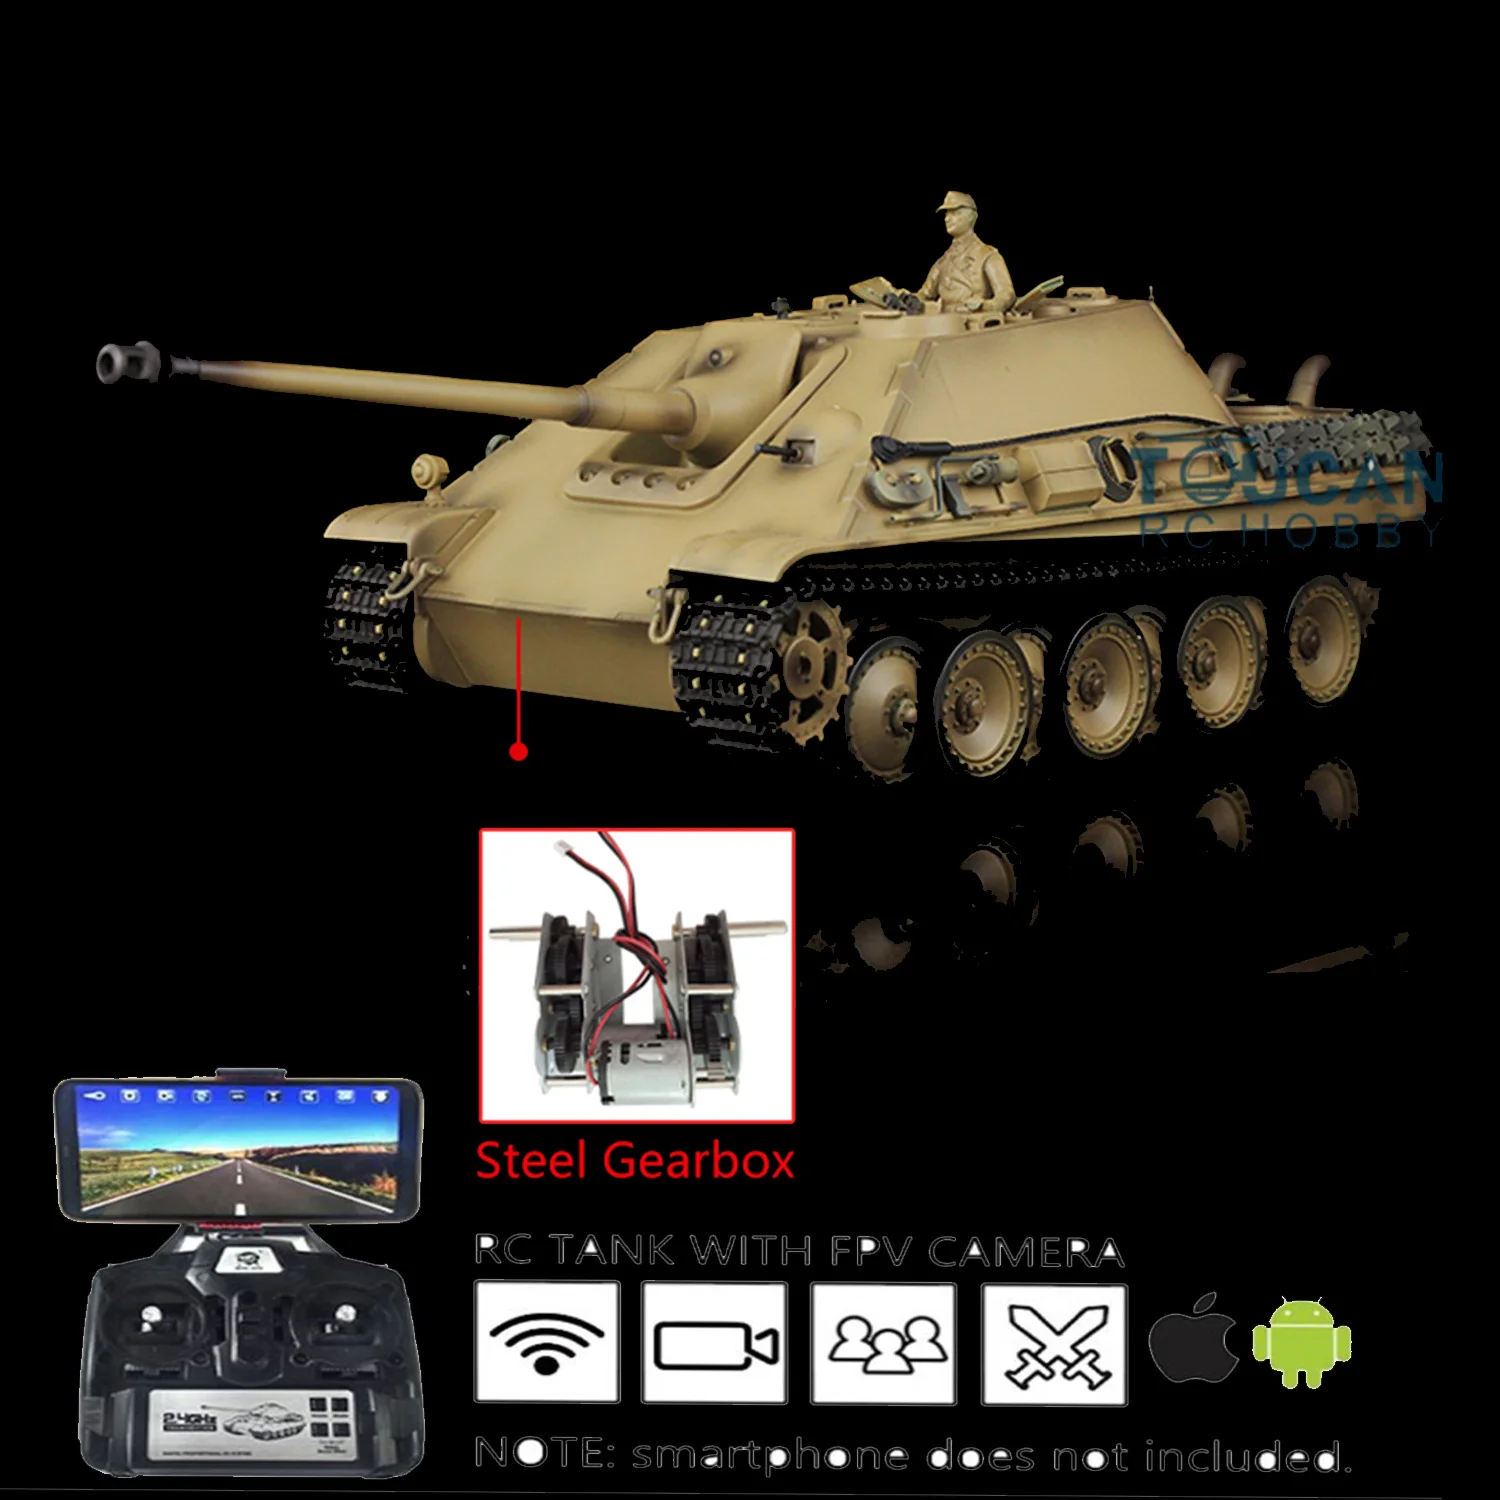 

Henglong 1/16 7.0 Plastic Jadpanther DIY FPV RTR RC Tank 3869 Steel Gearbox Smoke Effect Infrared Battle TH17444-SMT7